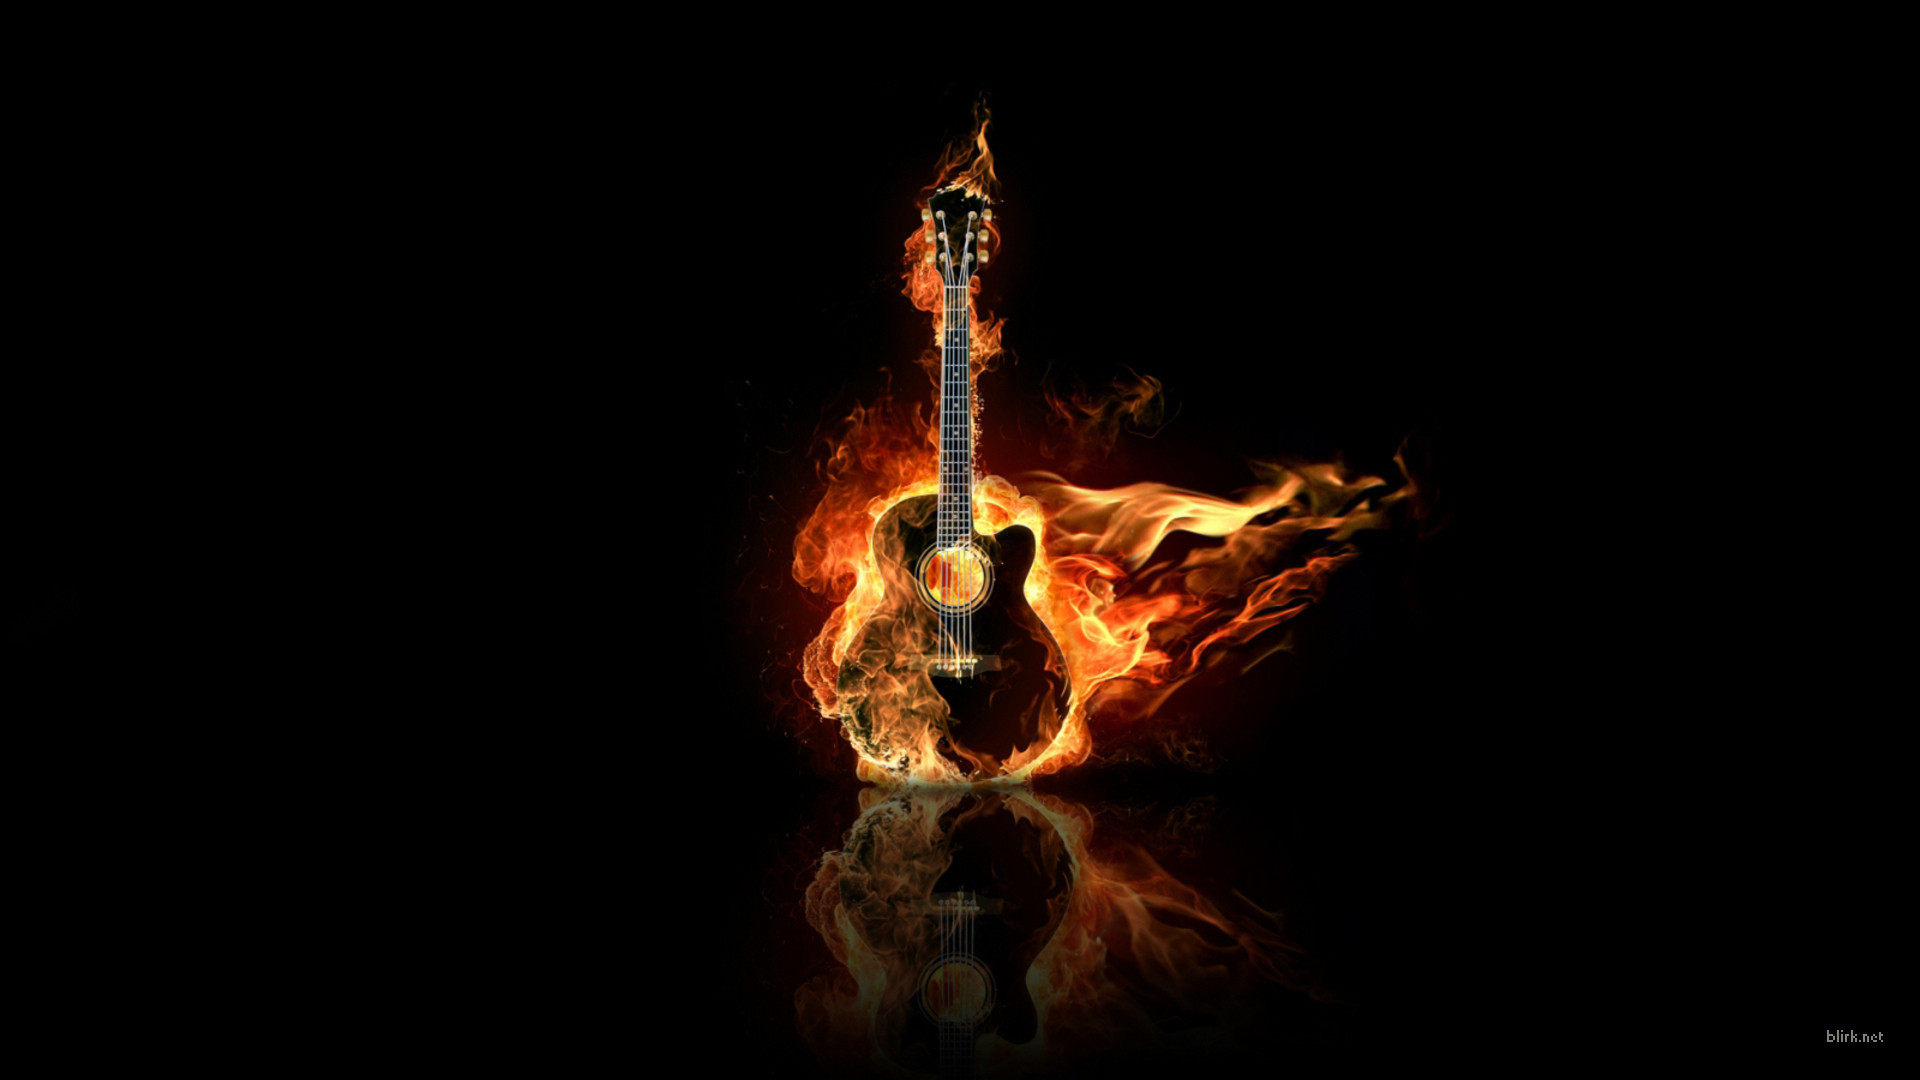 1920x1080 Cool Guitar Wallpapers 8658 Hd Wallpapers in Music Imagescicom 